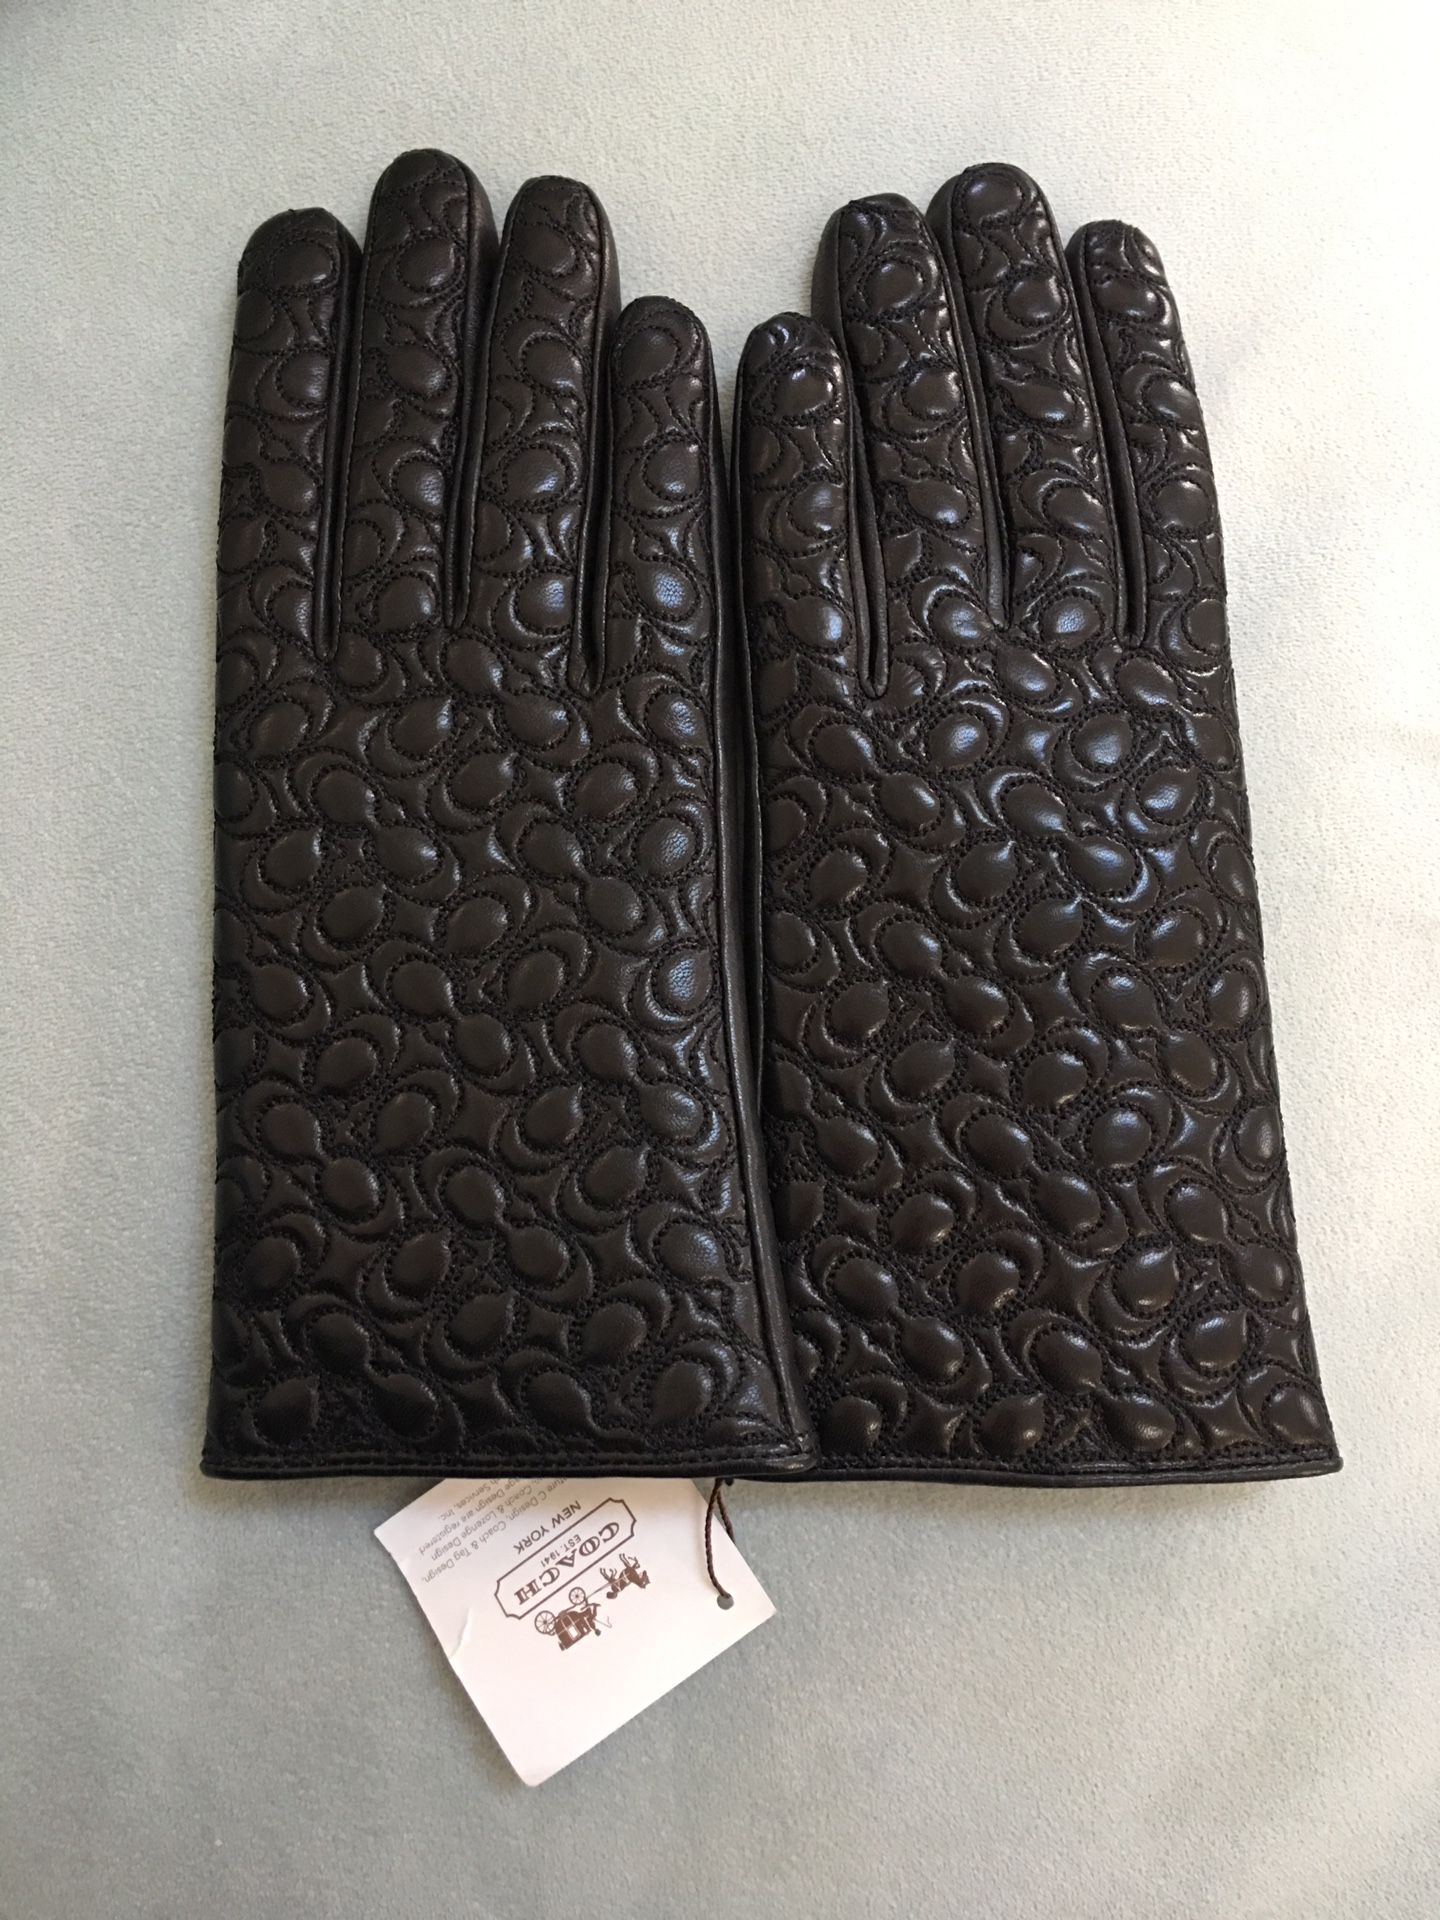 NWT Coach Signature Quilted Black Leather Gloves (size 7) for sale!!!!